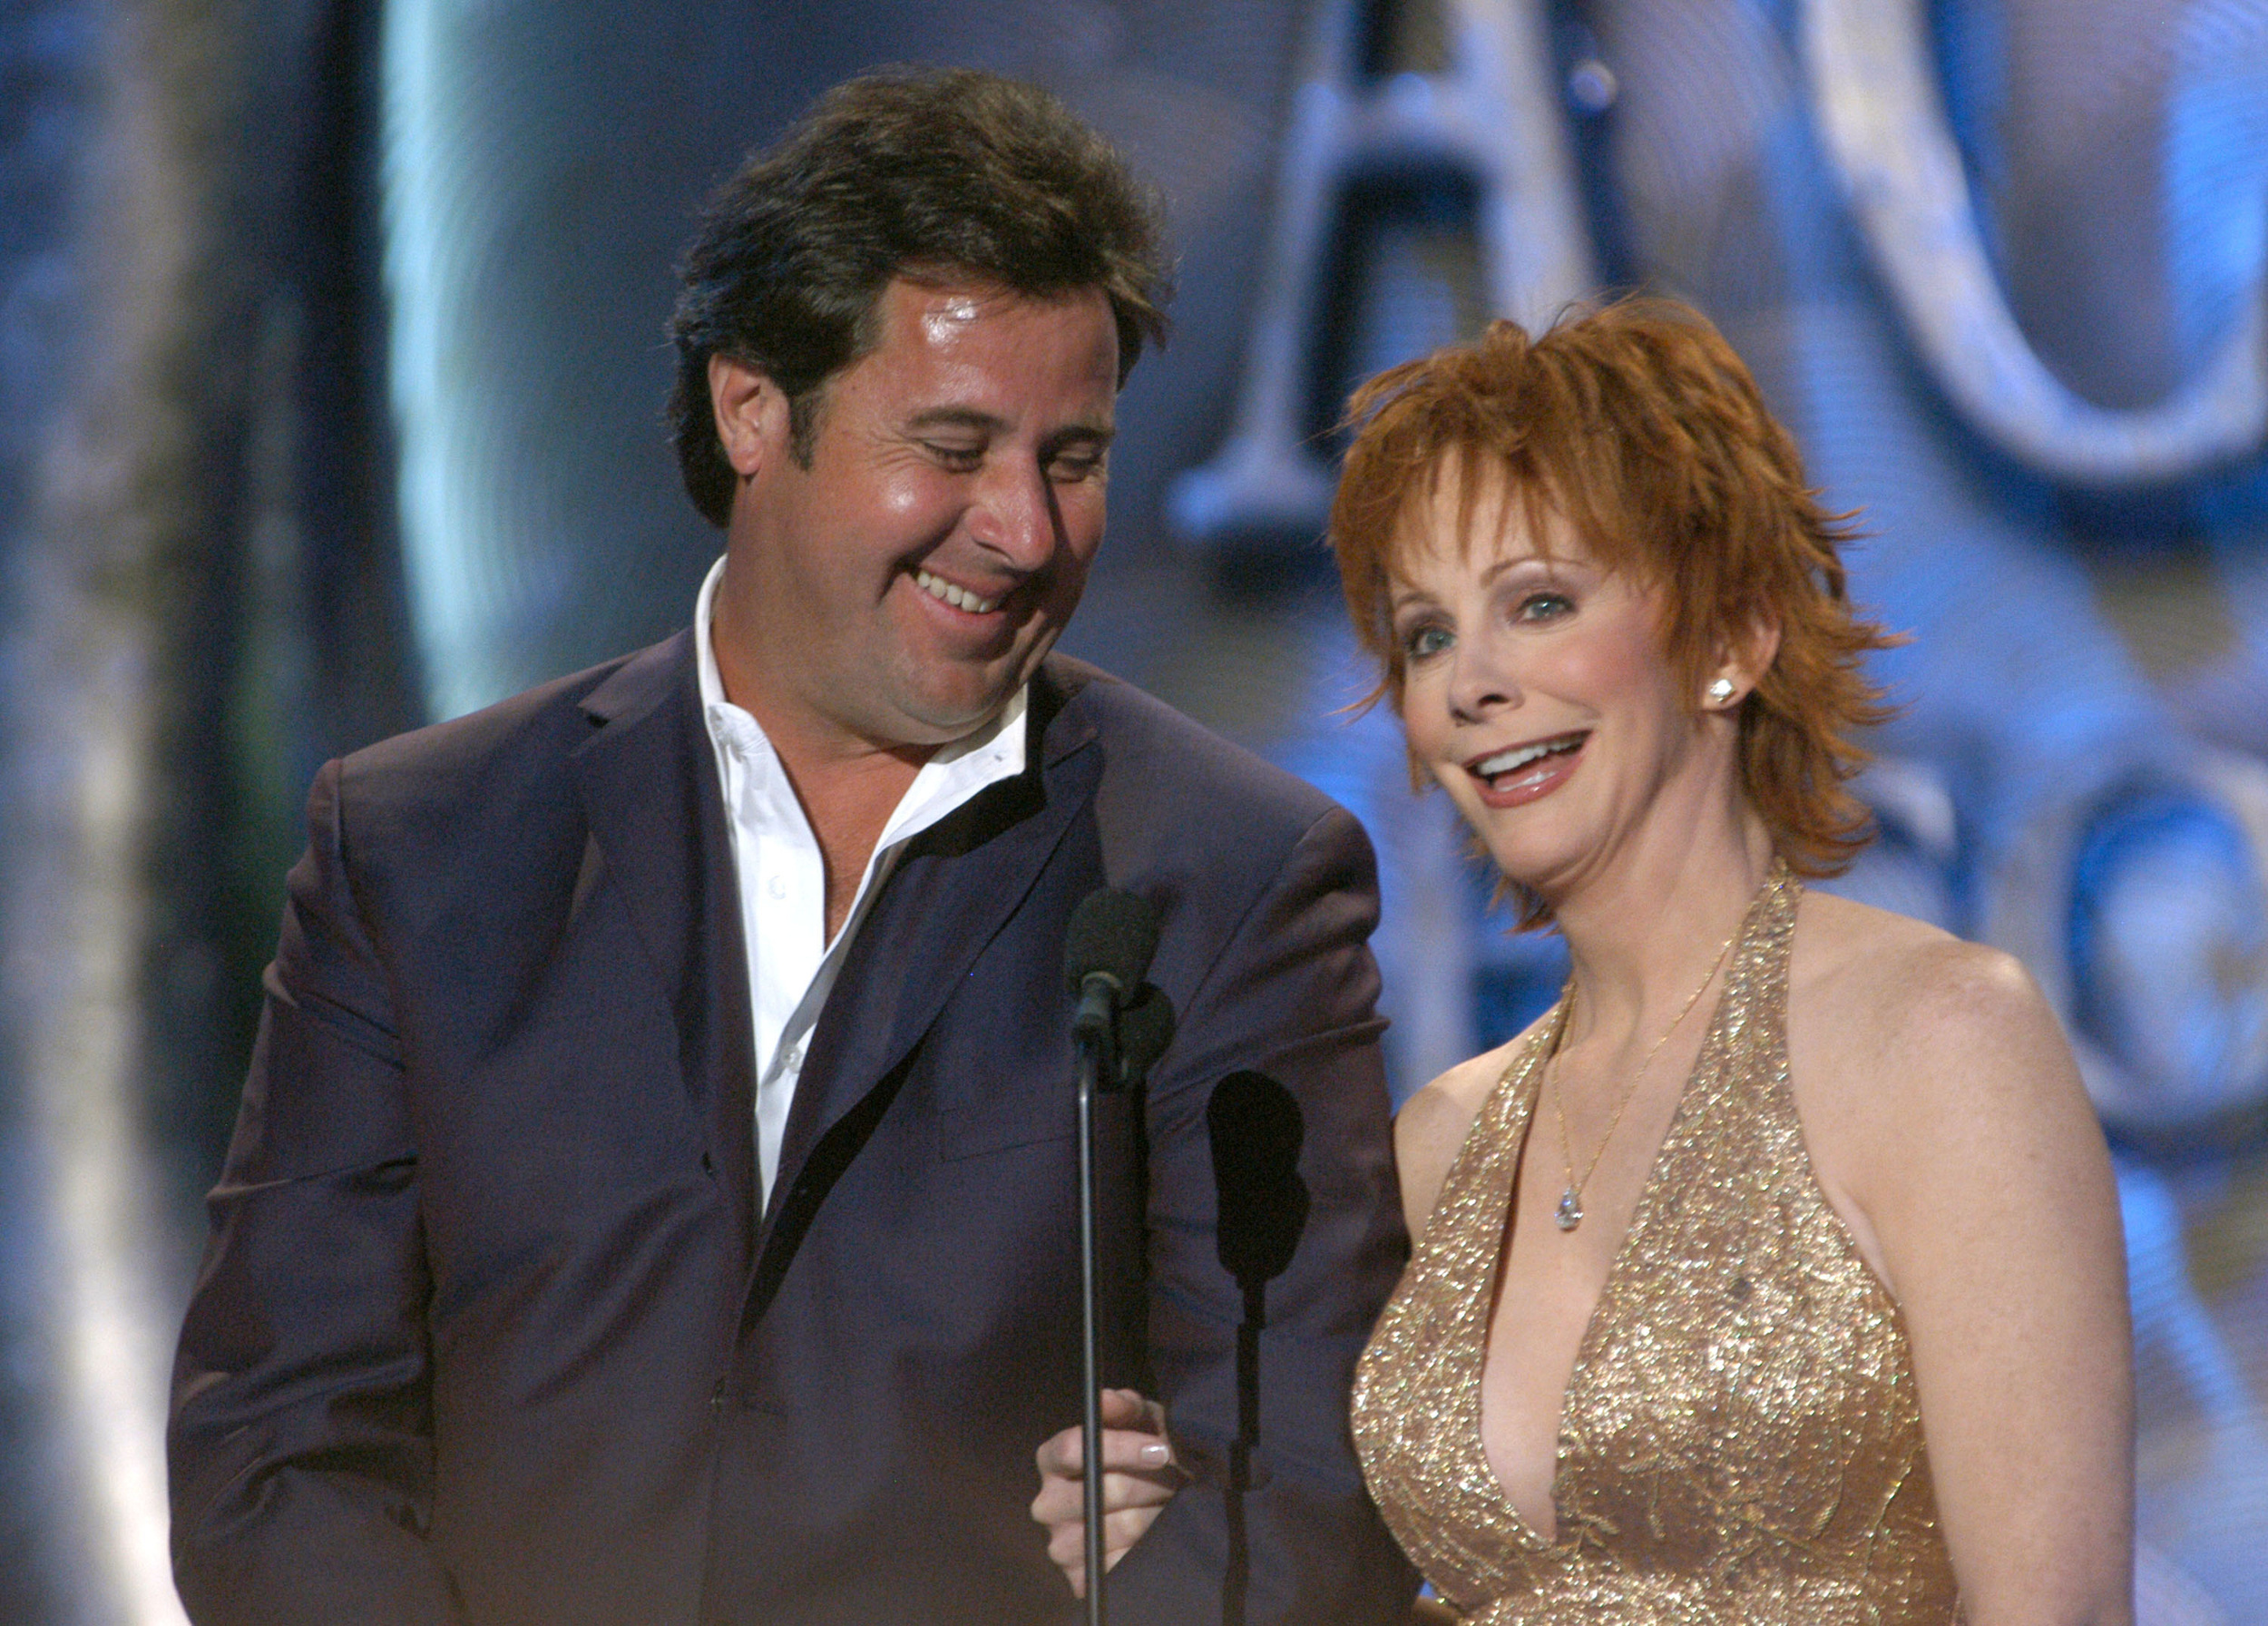 <p>This 1993 chart-topper brought together Reba McEntire and Vince Gill, two of the most powerful vocalists in country music history. Originally, the plan was for McEntire to record "The Heart Won't Lie" with Kenny Rogers, but that fell through. Eventually, Gill was called in to record the other half, and the rest is history. </p><p>You may also like: <a href='https://www.yardbarker.com/entertainment/articles/every_razzie_worst_picture_winner_by_year/s1__31243484'>Every Razzie Worst Picture winner by year</a></p>